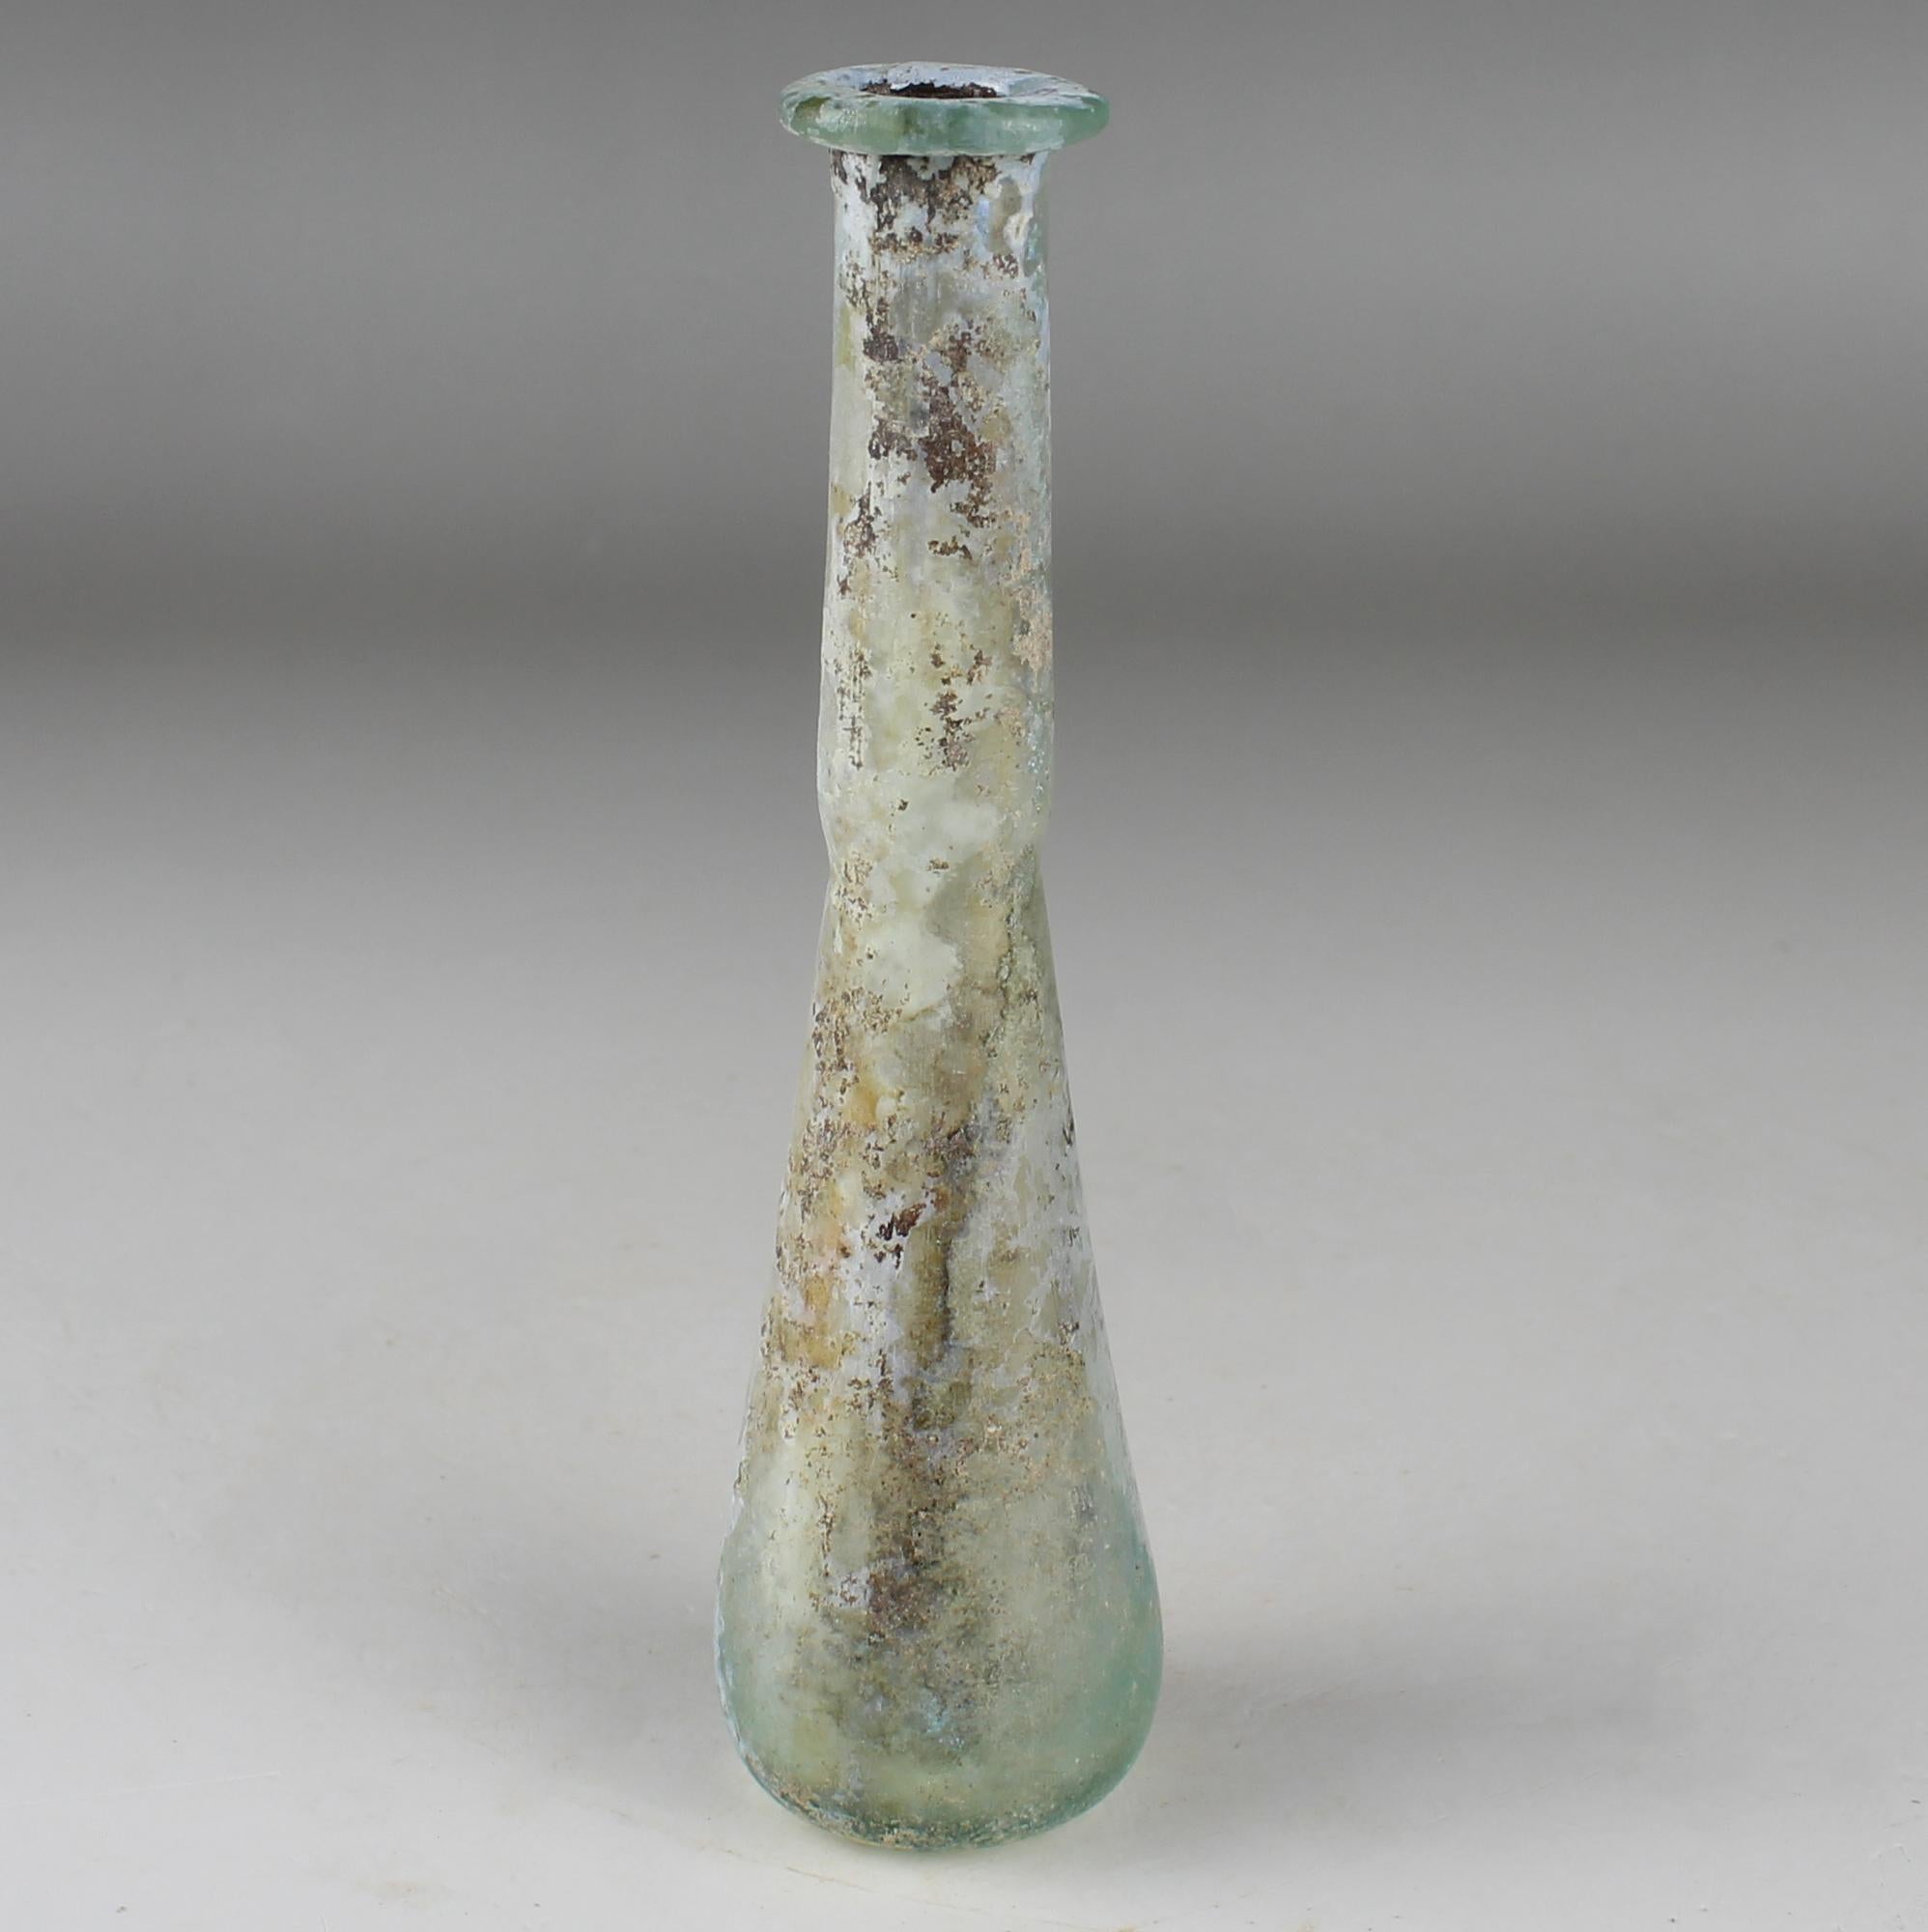 ITEM: Flask
MATERIAL: Glass
CULTURE: Roman
PERIOD: 1st – 3rd Century A.D
DIMENSIONS: 120 mm x 30 mm
CONDITION: Good condition
PROVENANCE: Ex French private collection, acquired between 1975 – 1990

Comes with Certificate of Authenticity and Export